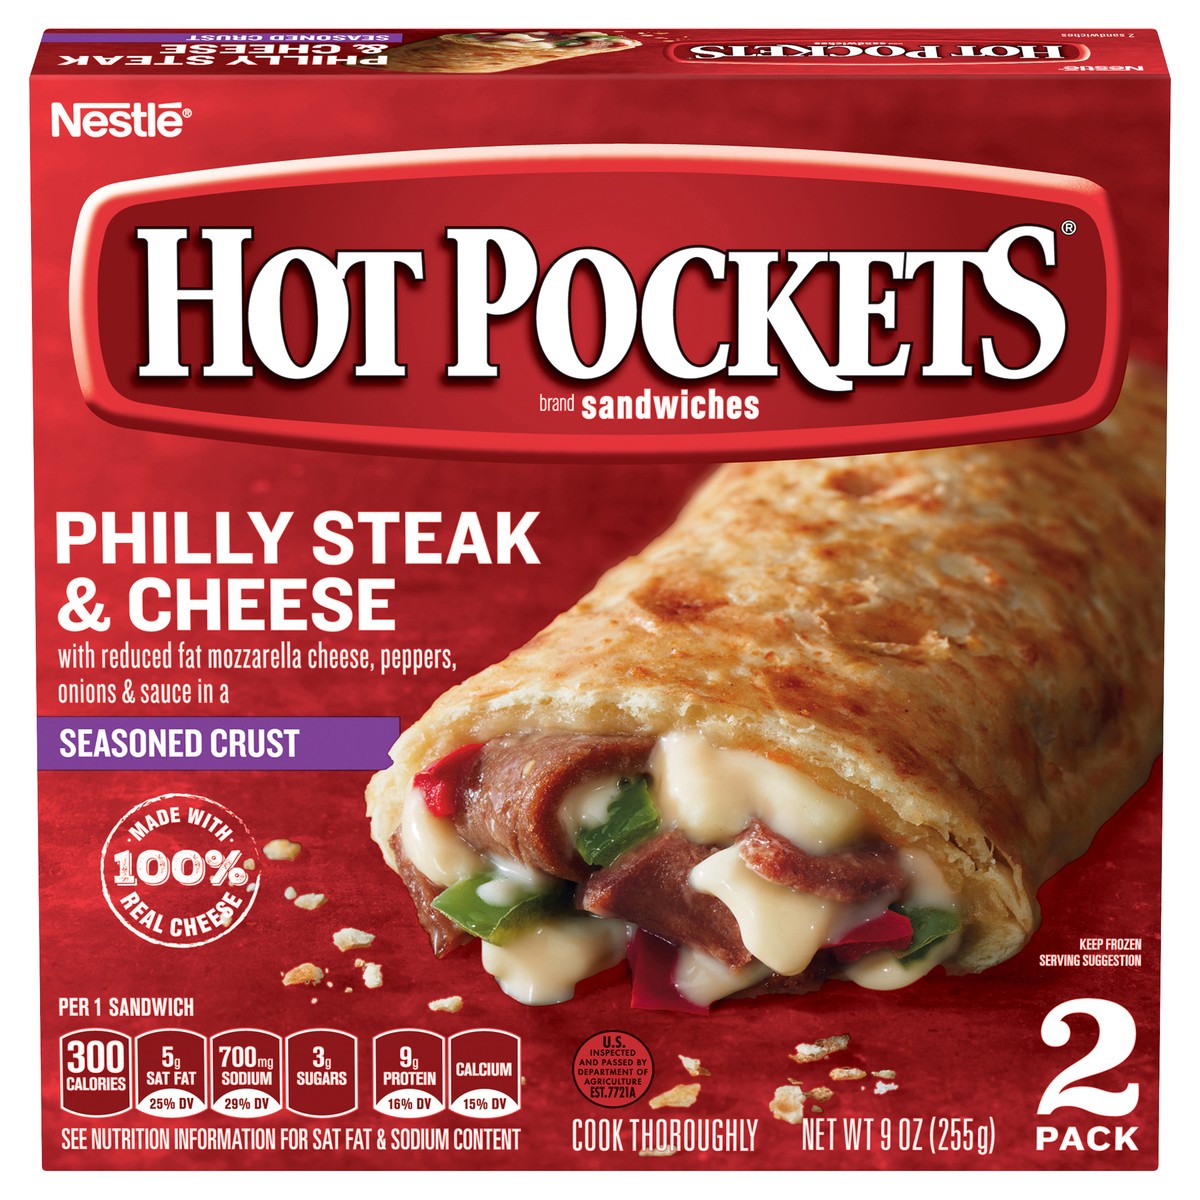 slide 1 of 9, Hot Pockets Philly Steak & Cheese Frozen Snacks in a Seasoned Crust, Philly Cheesesteak Made with Real Reduced Fat Mozzarella Cheese, 2 Count Frozen Sandwiches, 9 oz